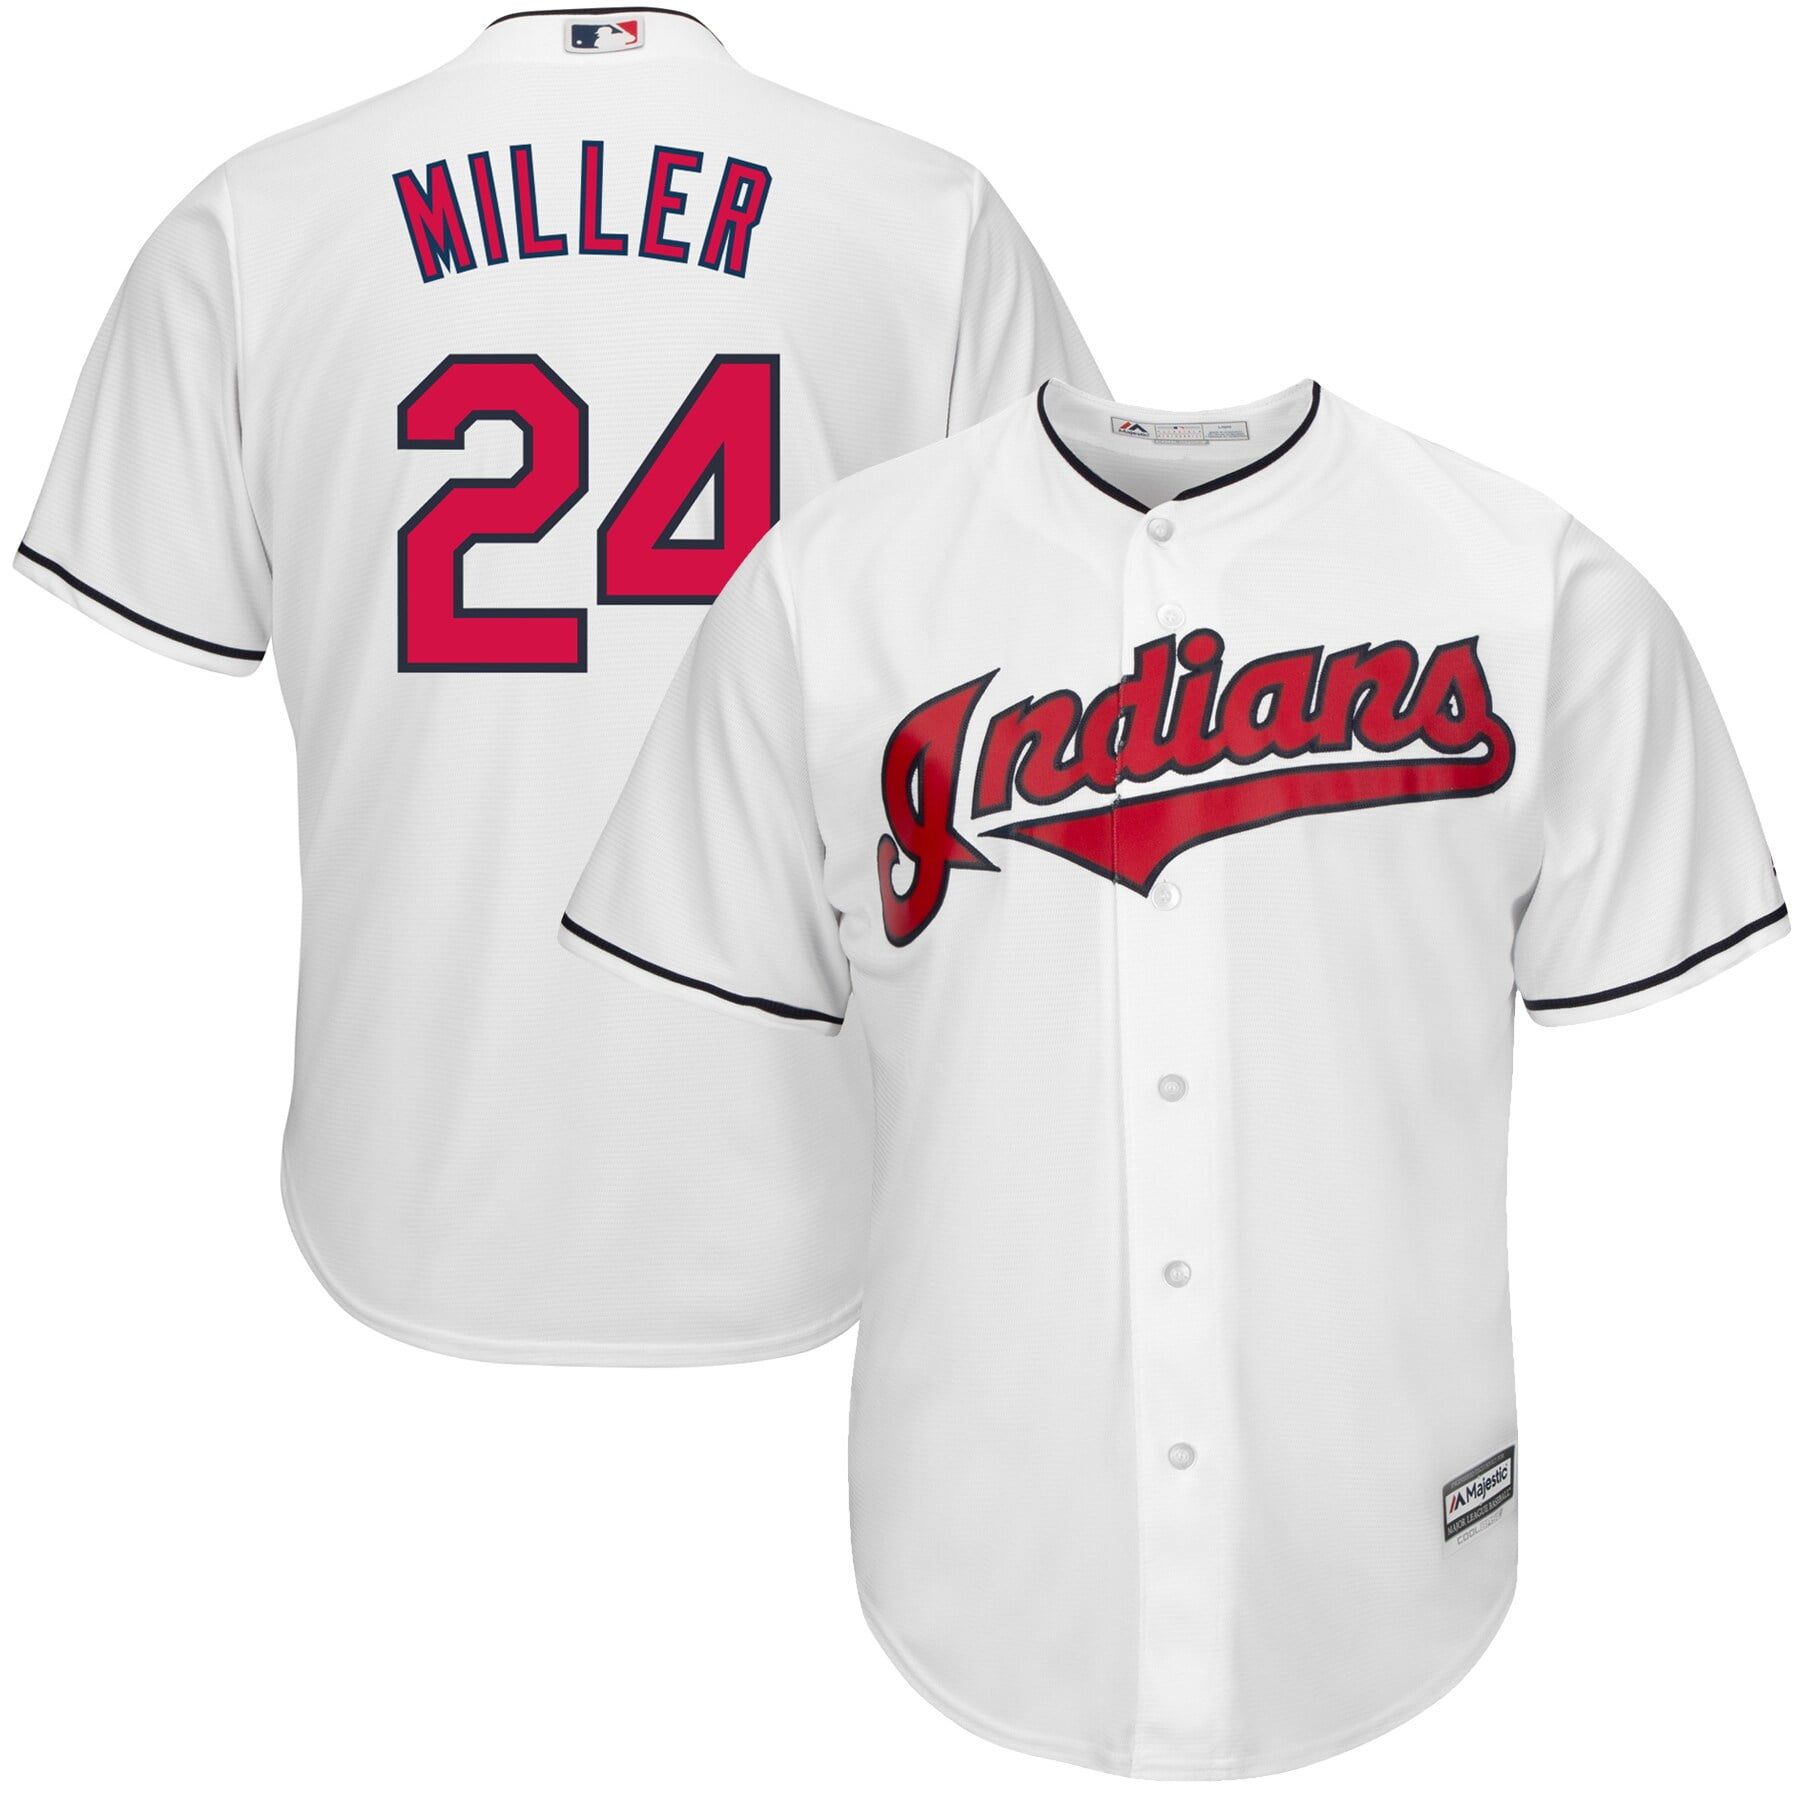 andrew miller jersey cleveland